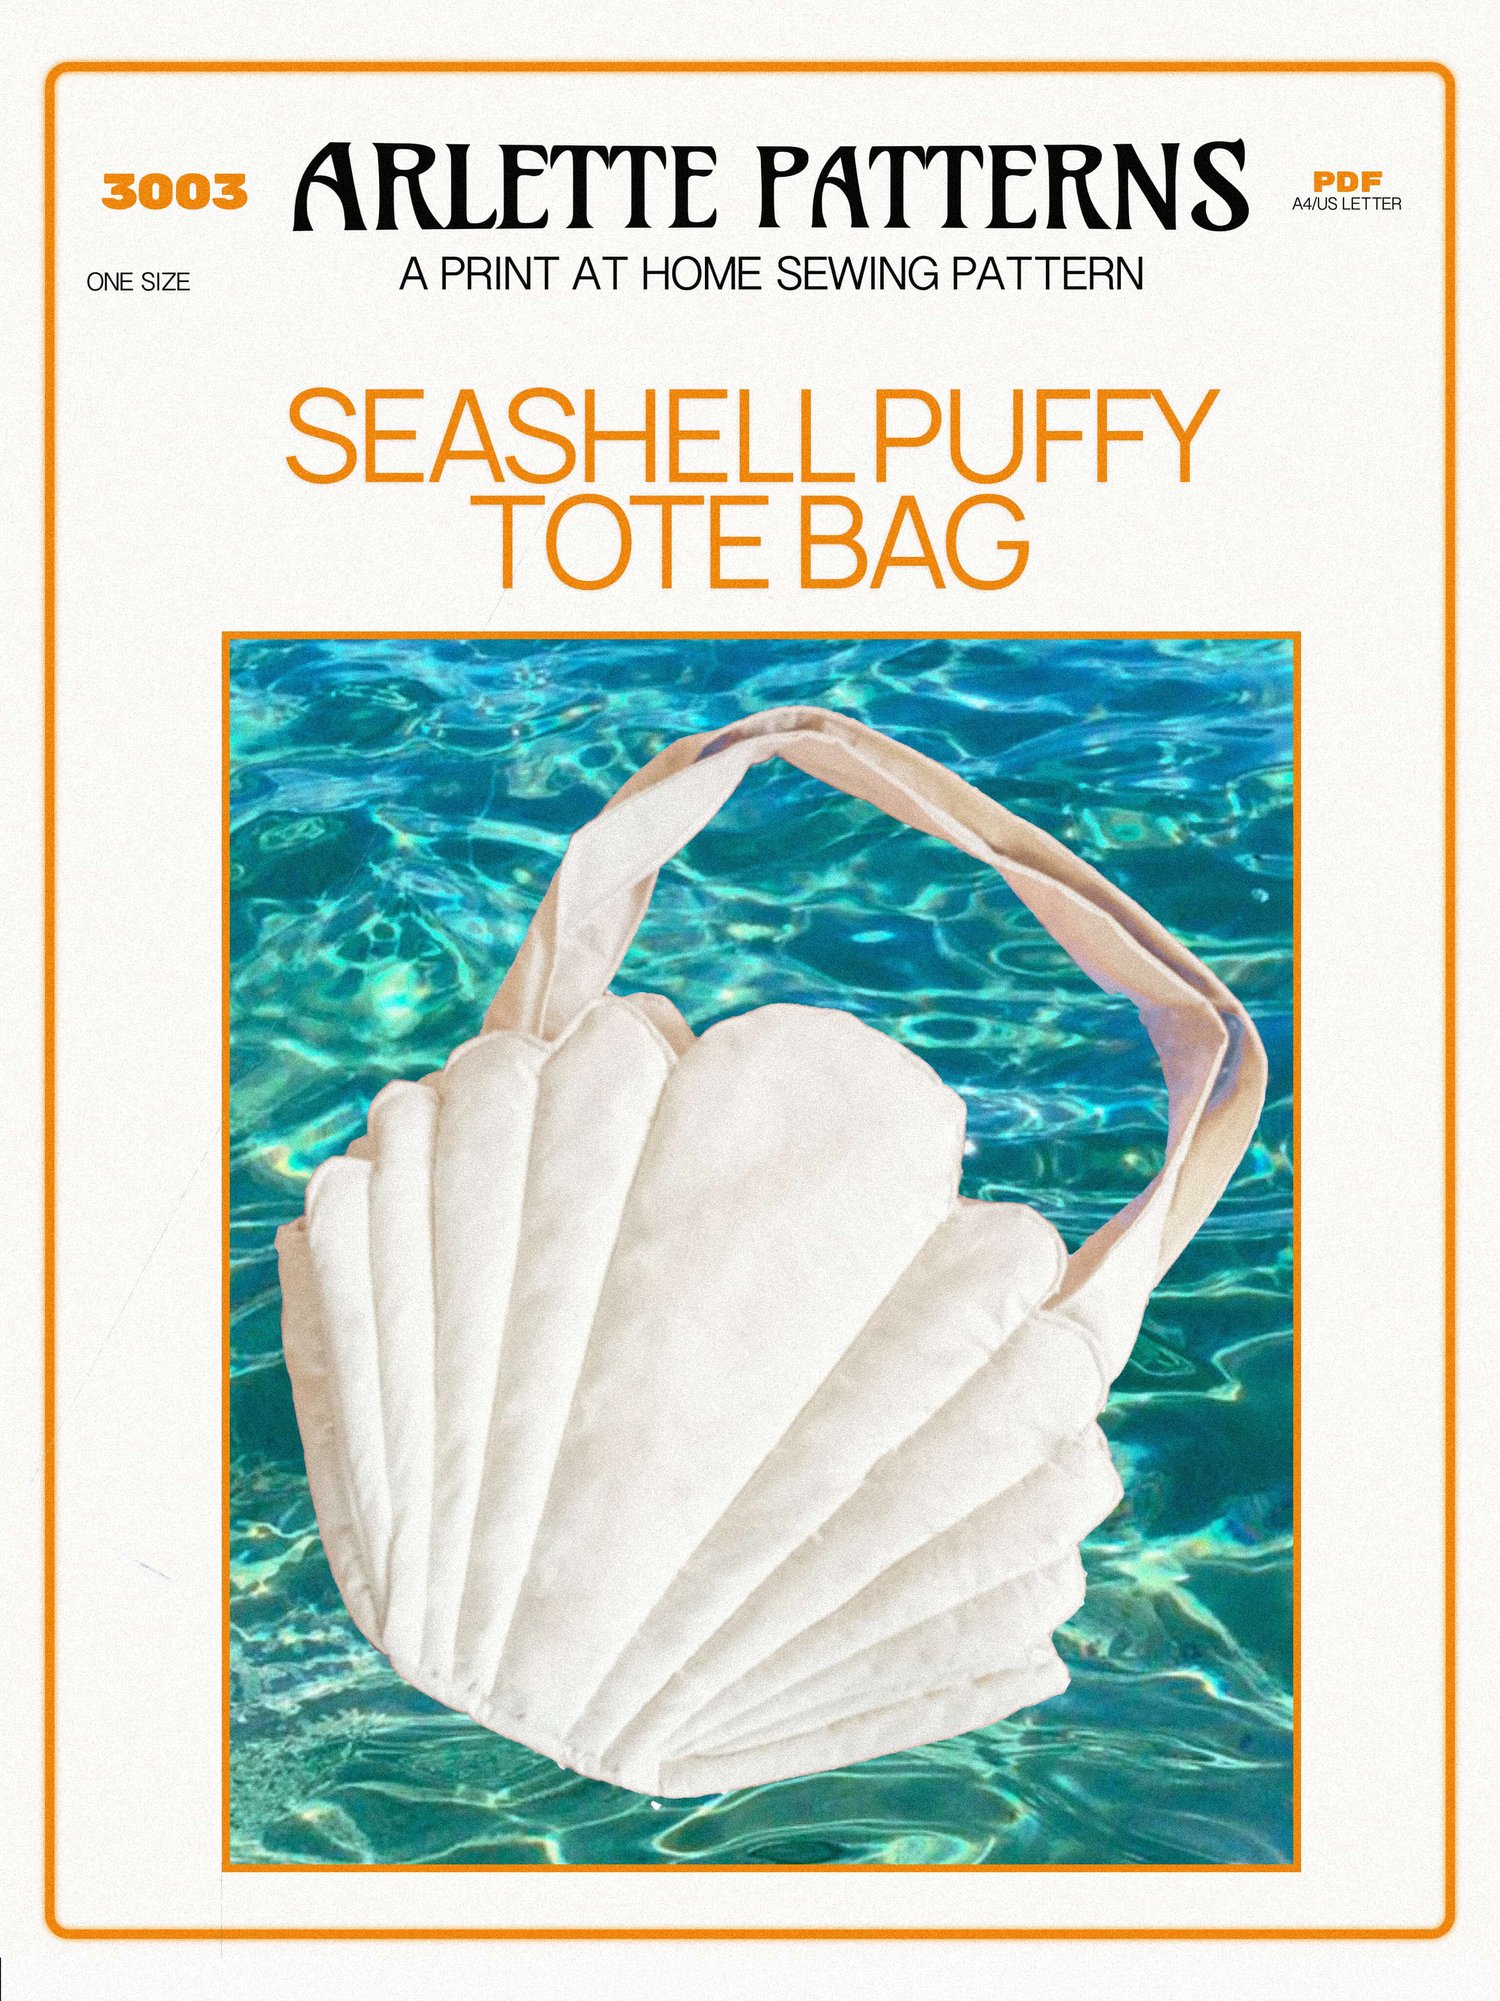 Seashell Puffy Tote Bag - Print at Home Sewing Pattern — Arlette